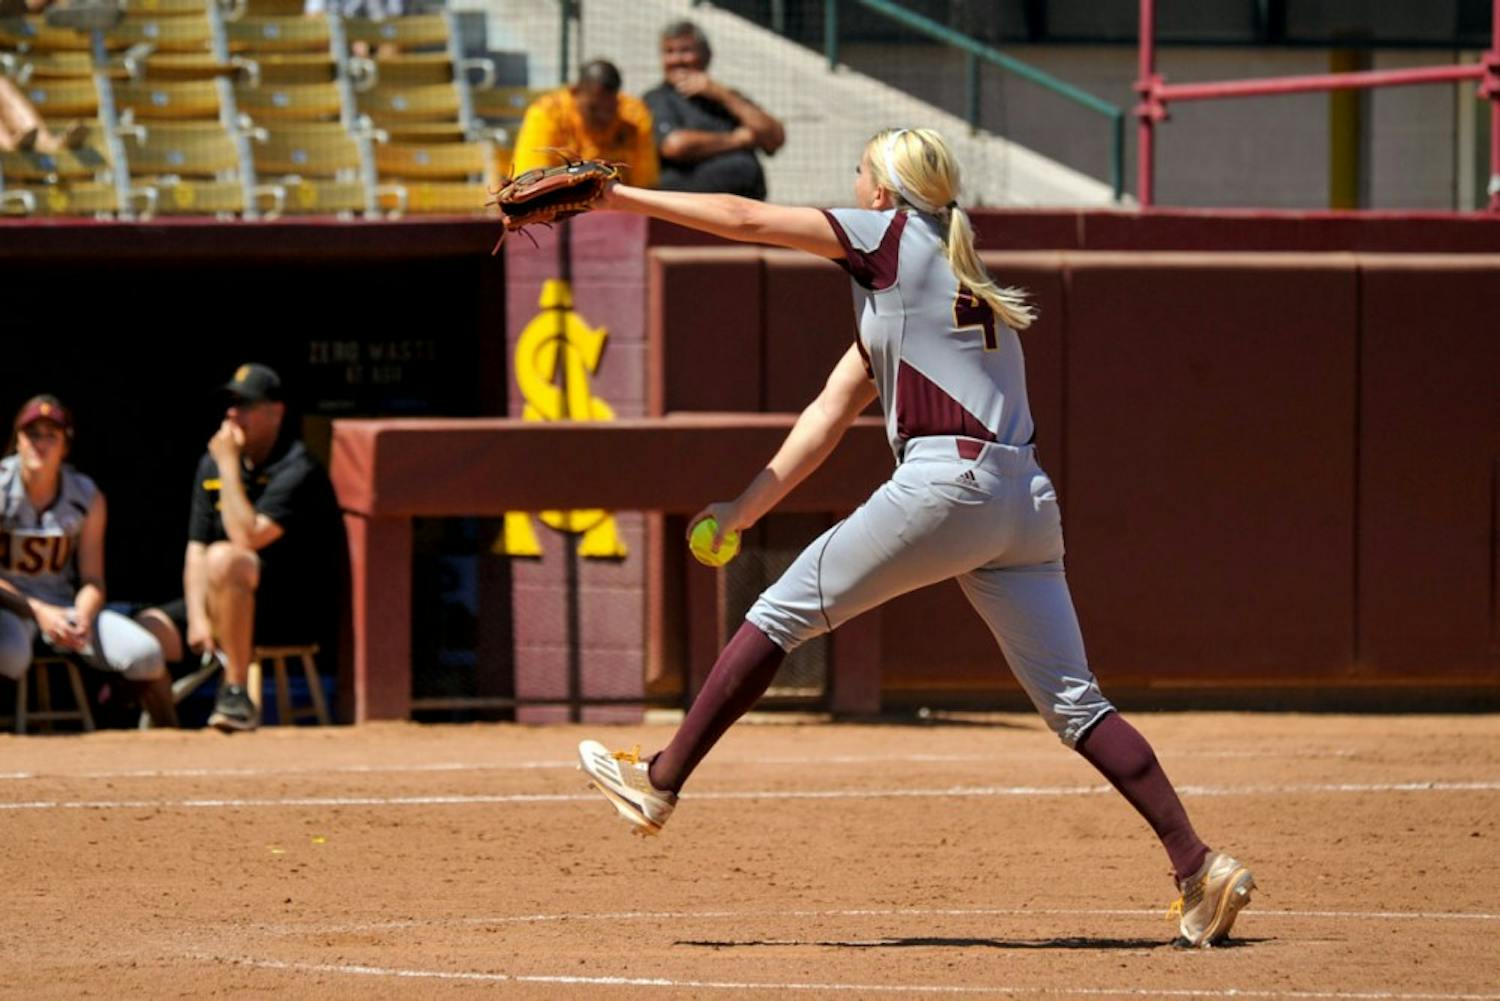 Junior Kelsey Kessler winds up for a pitch during the sixth inning against Texas Tech on Saturday, March 26, 2016, at Farrington Stadium in Tempe, Arizona.